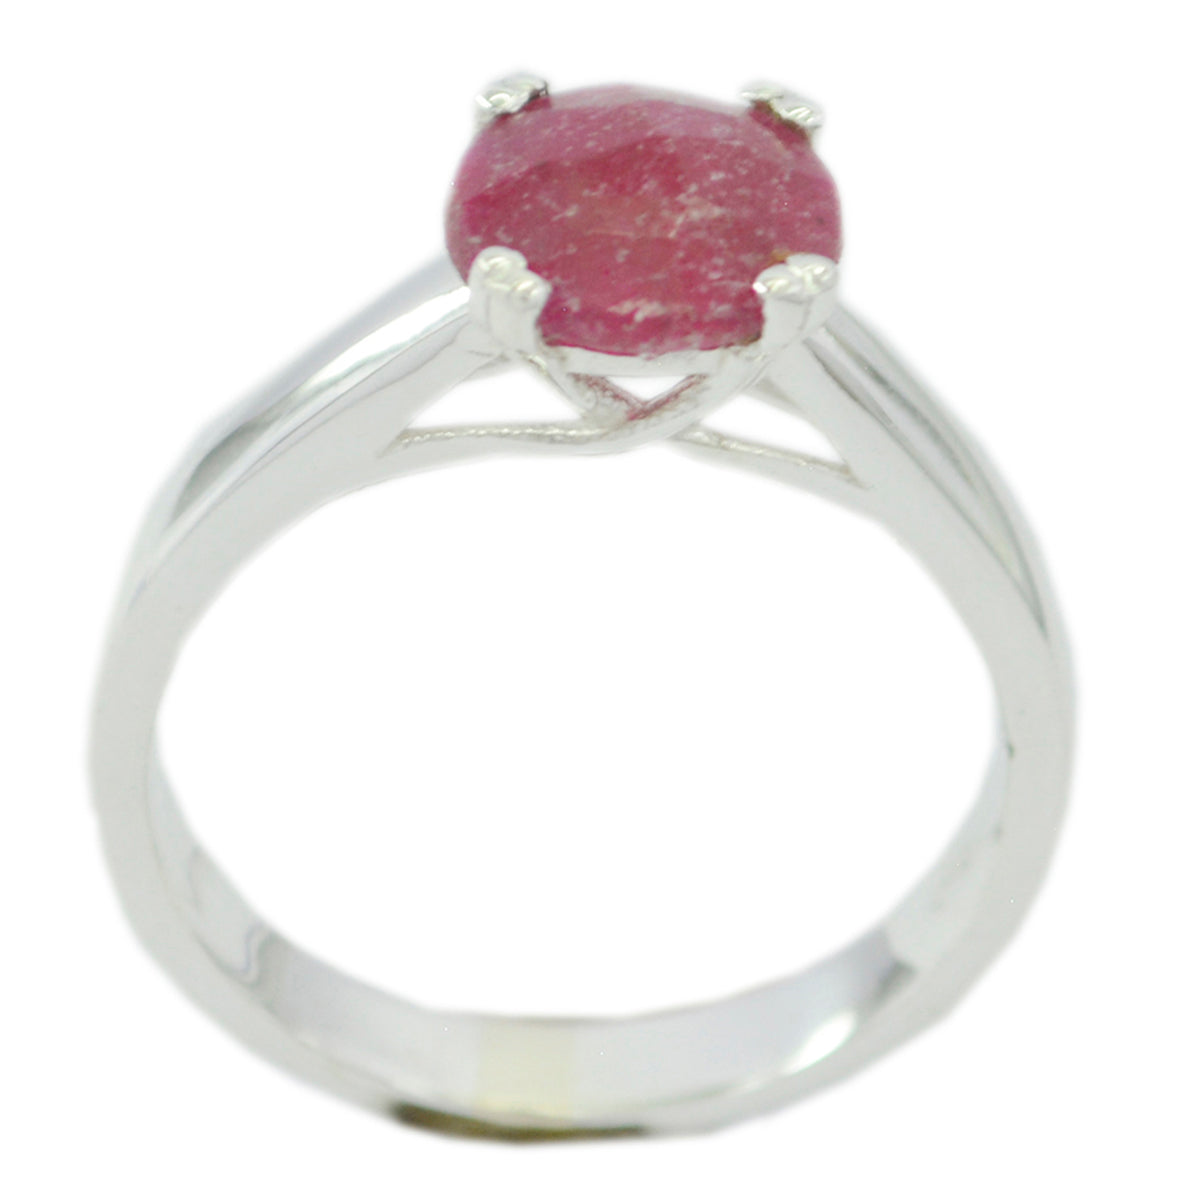 Riyo Excellent Gem Indianruby 925 Rings Jewelry Pawn Shops Near Me